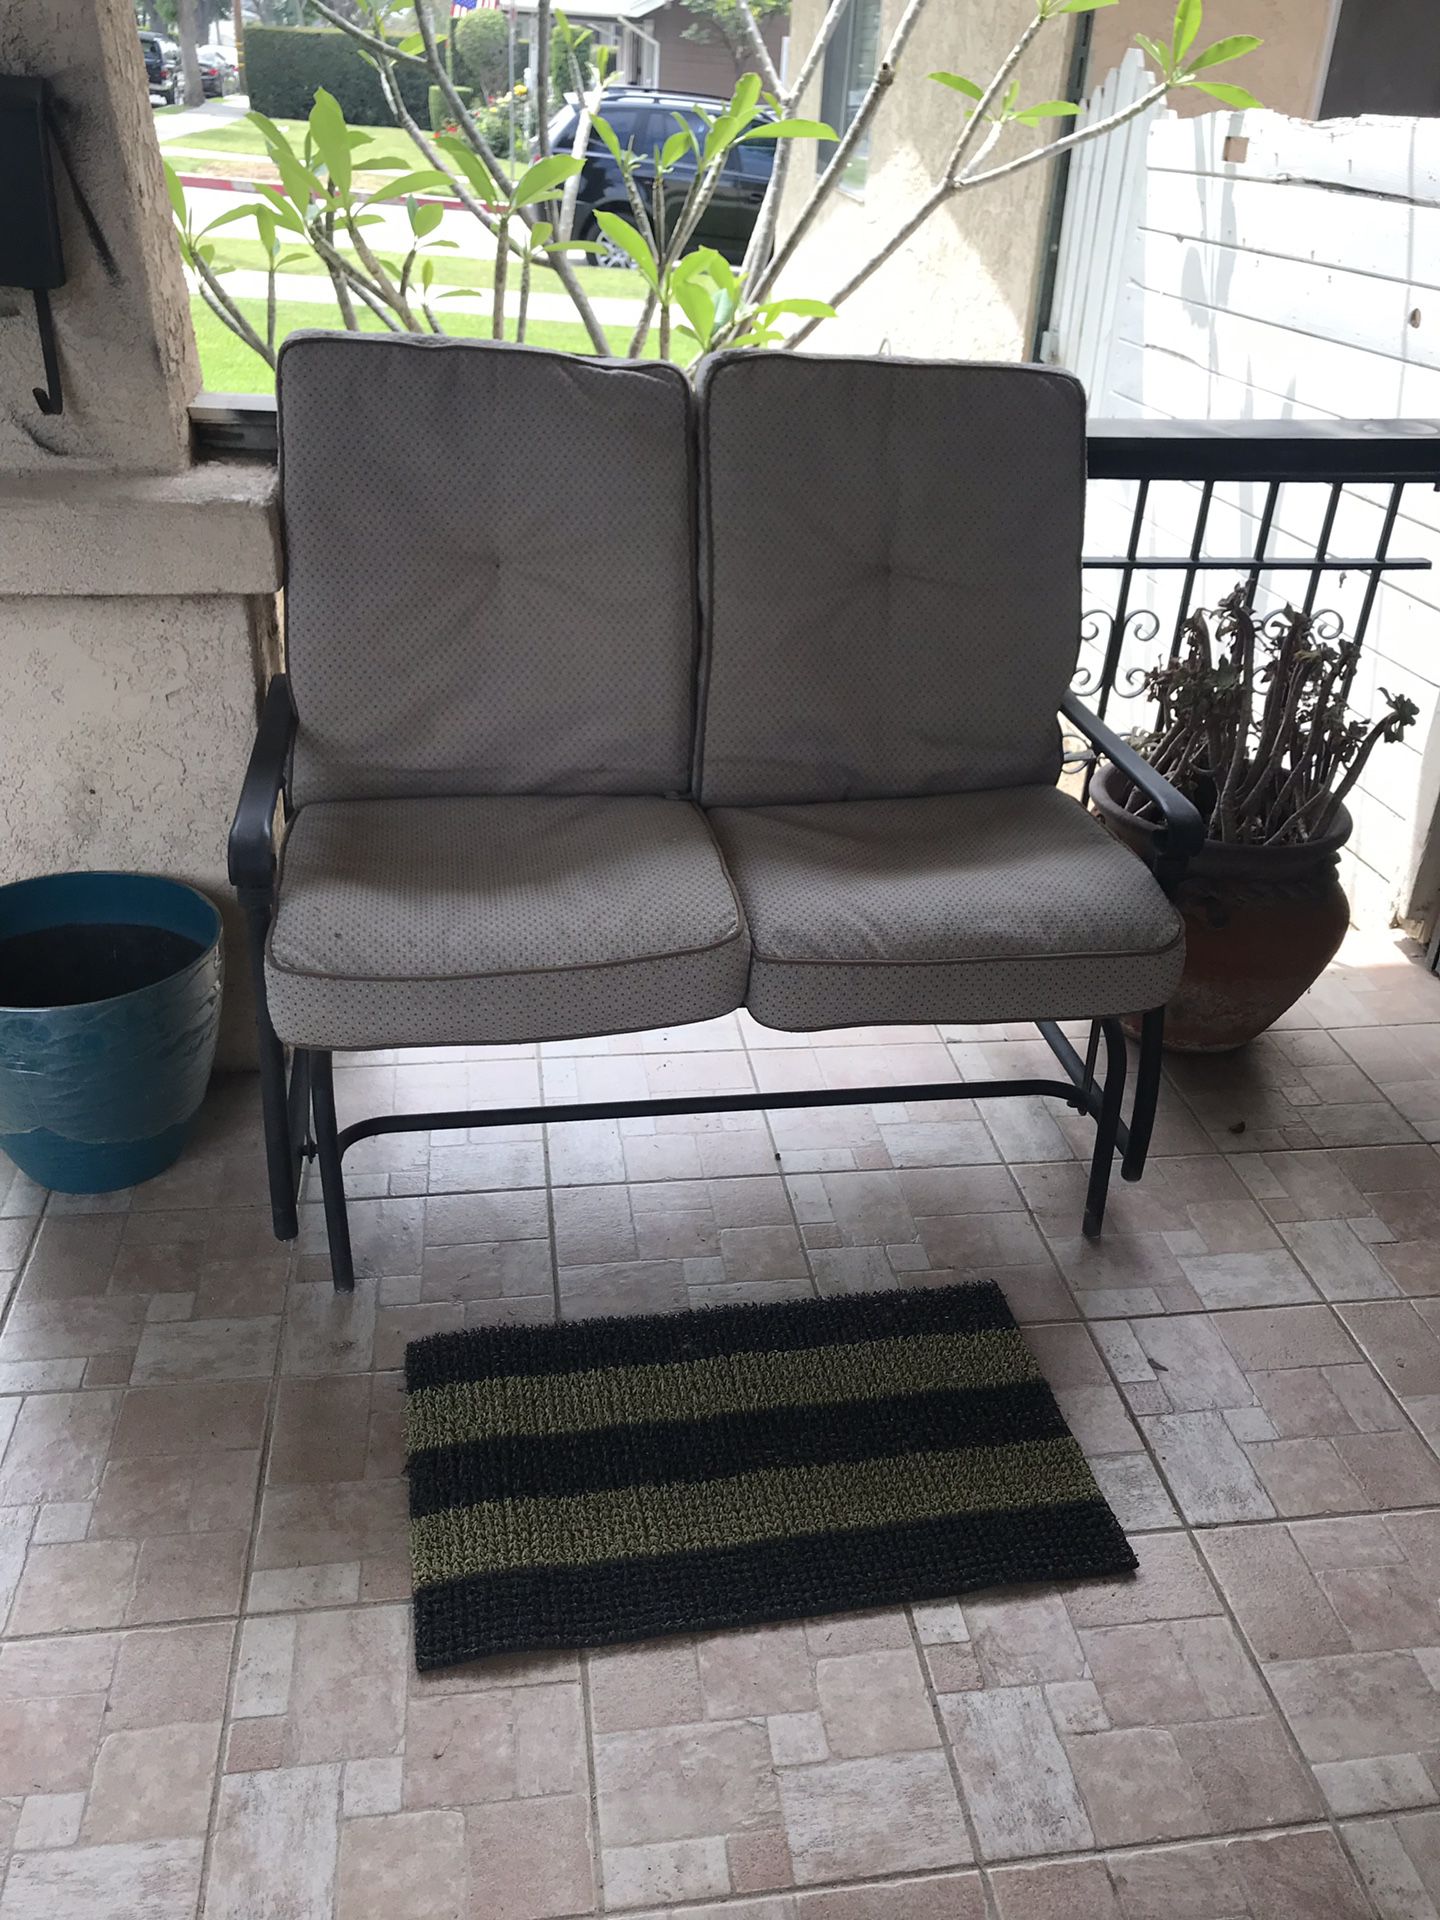 Bench glider porch swing with cushions